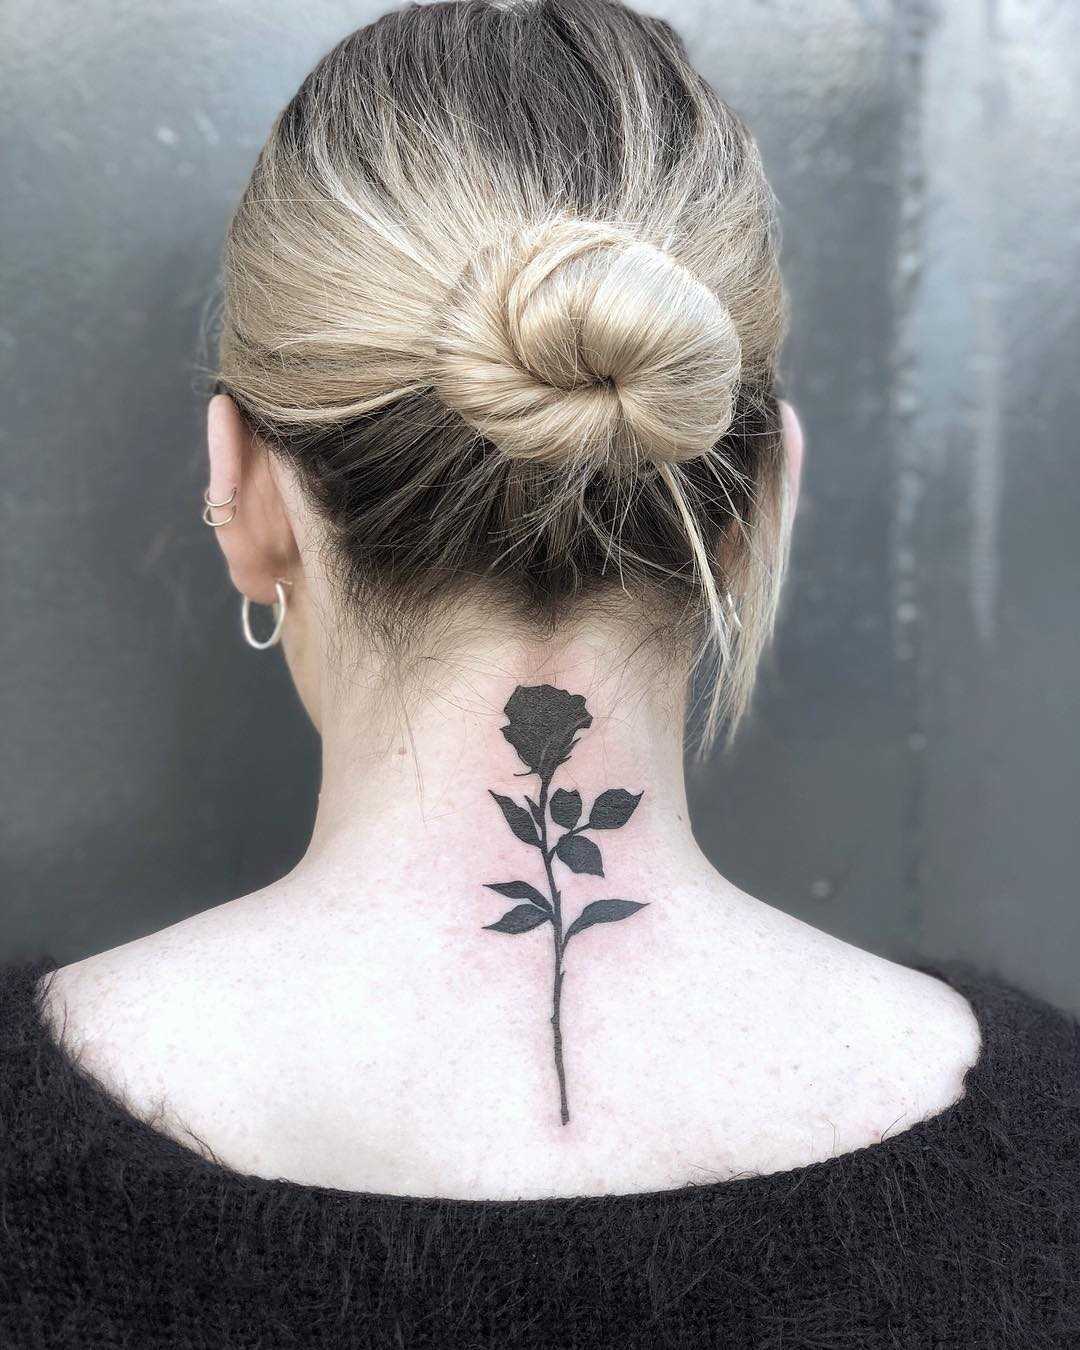 Black rose tattoo on the back by Loz McLean - Tattoogrid.net